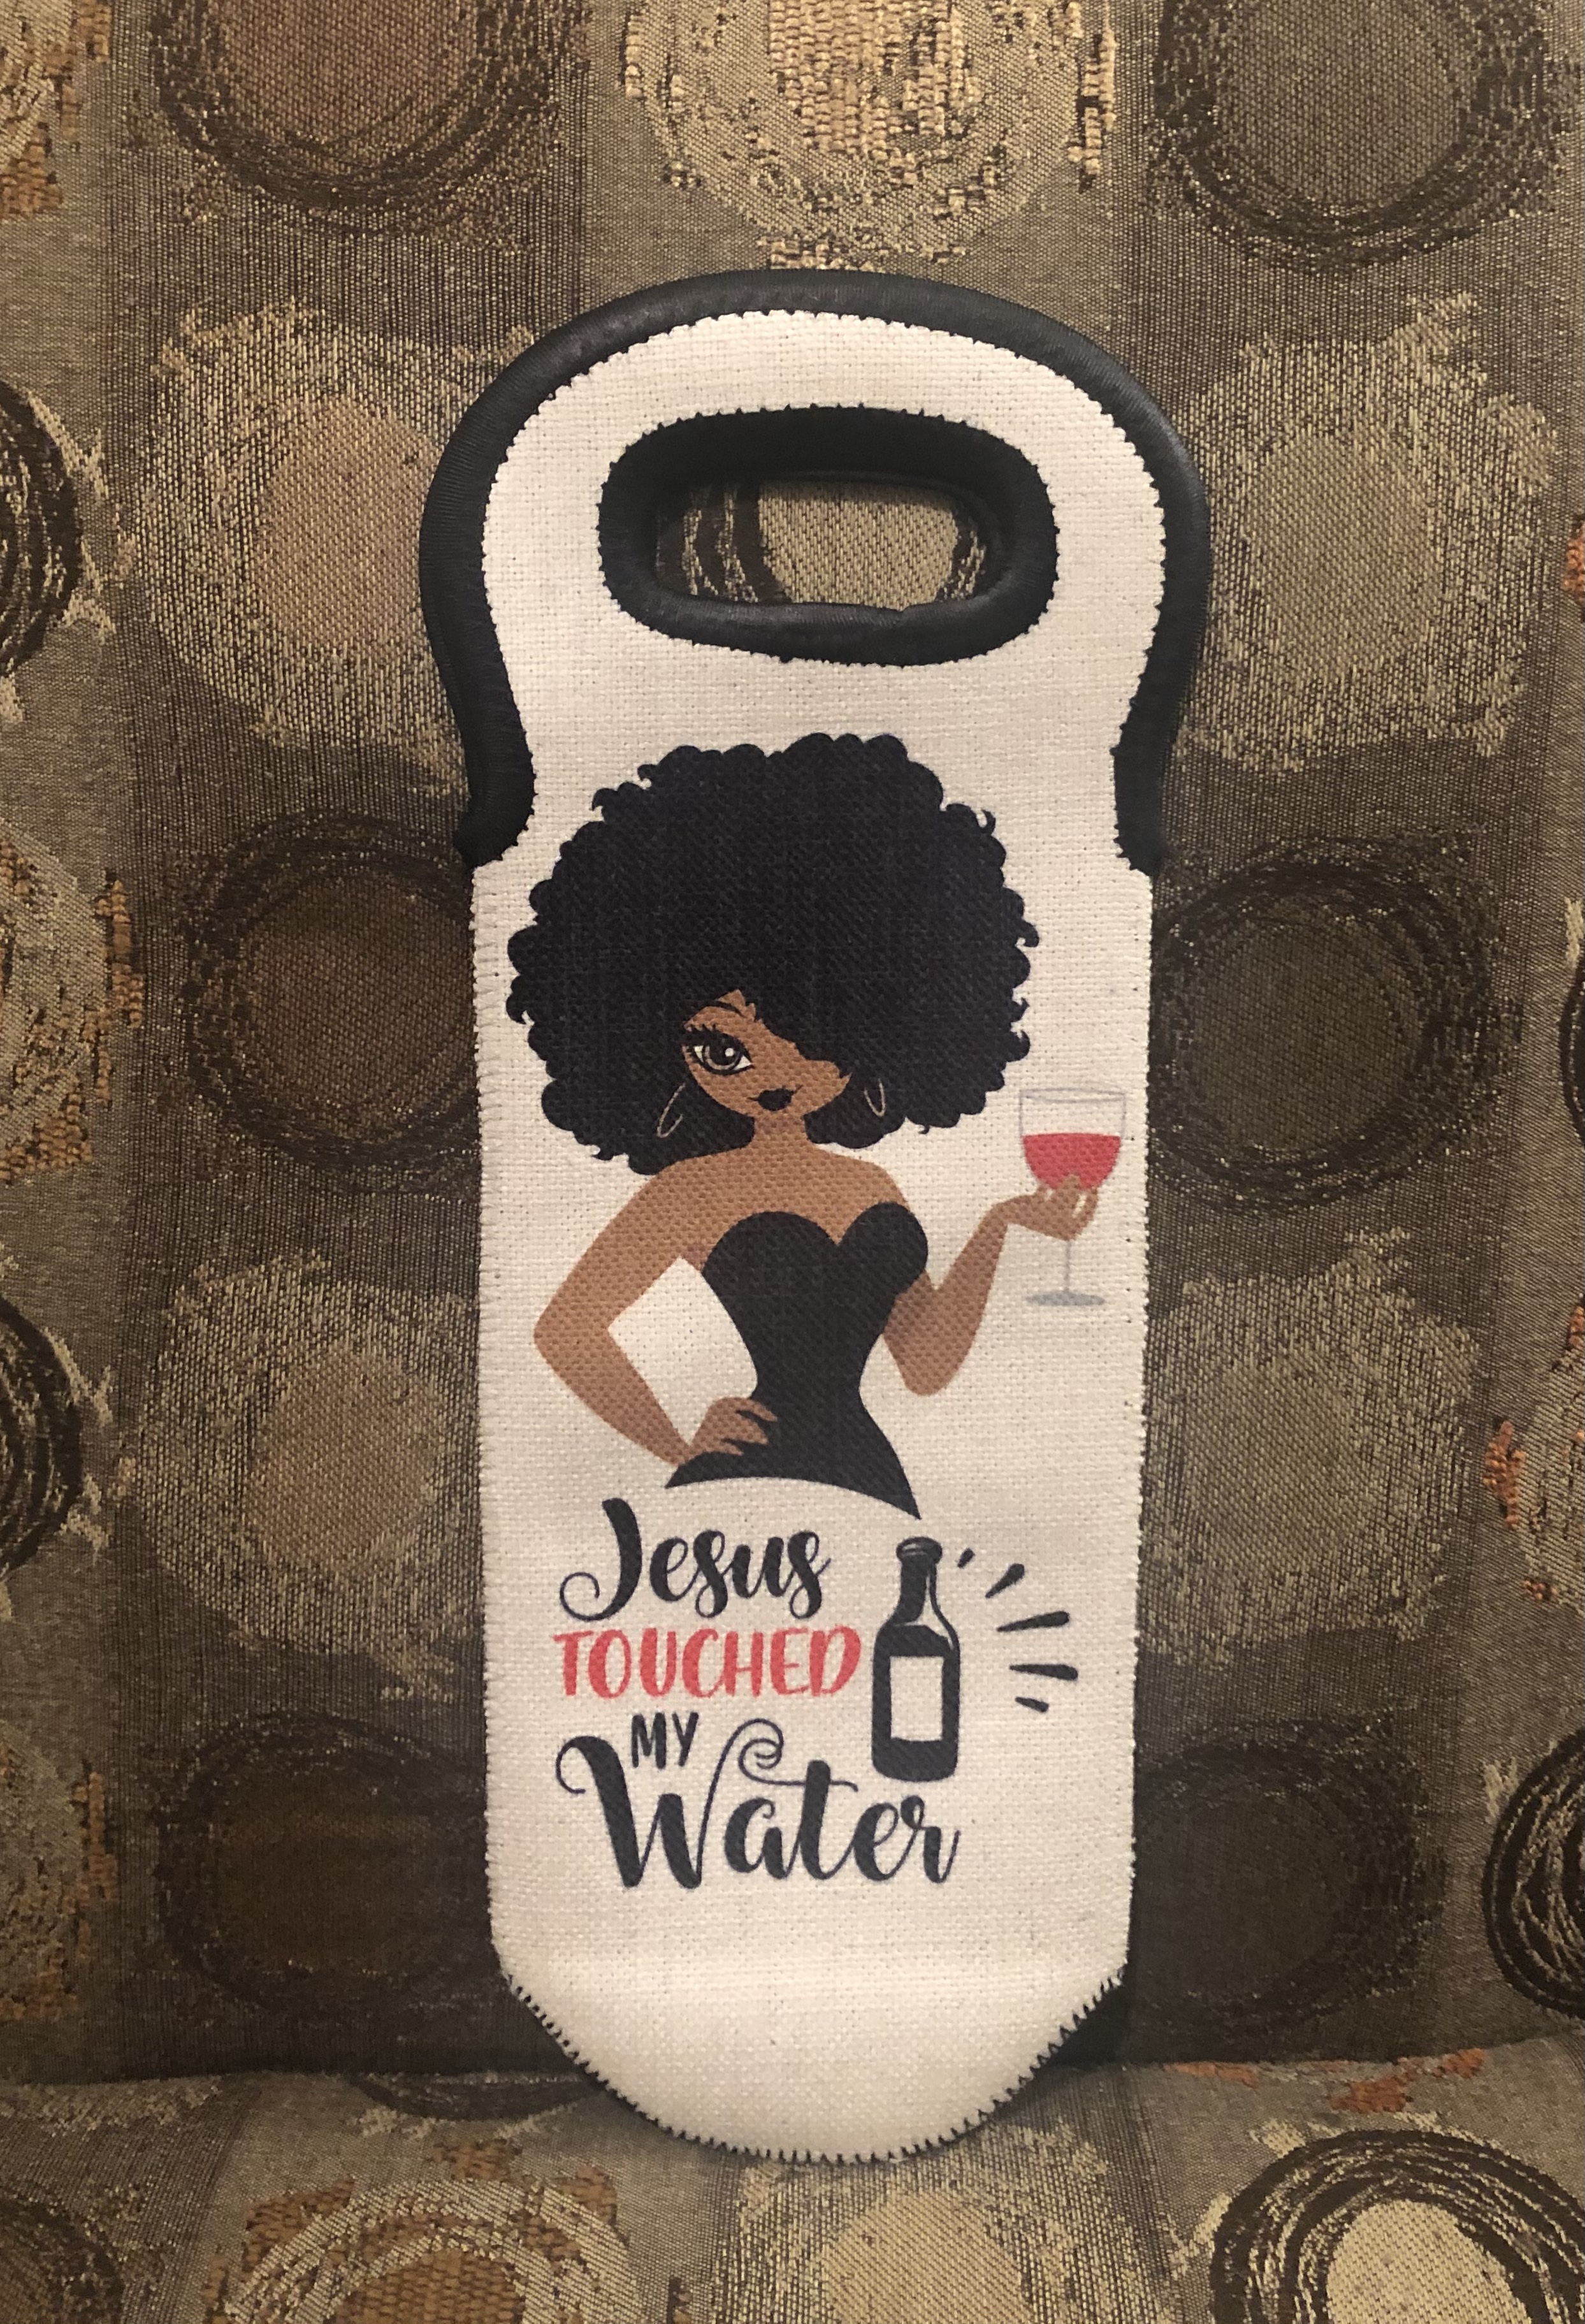 Wine totes for the holidays! This year we have all been faced with many challenges and can all 